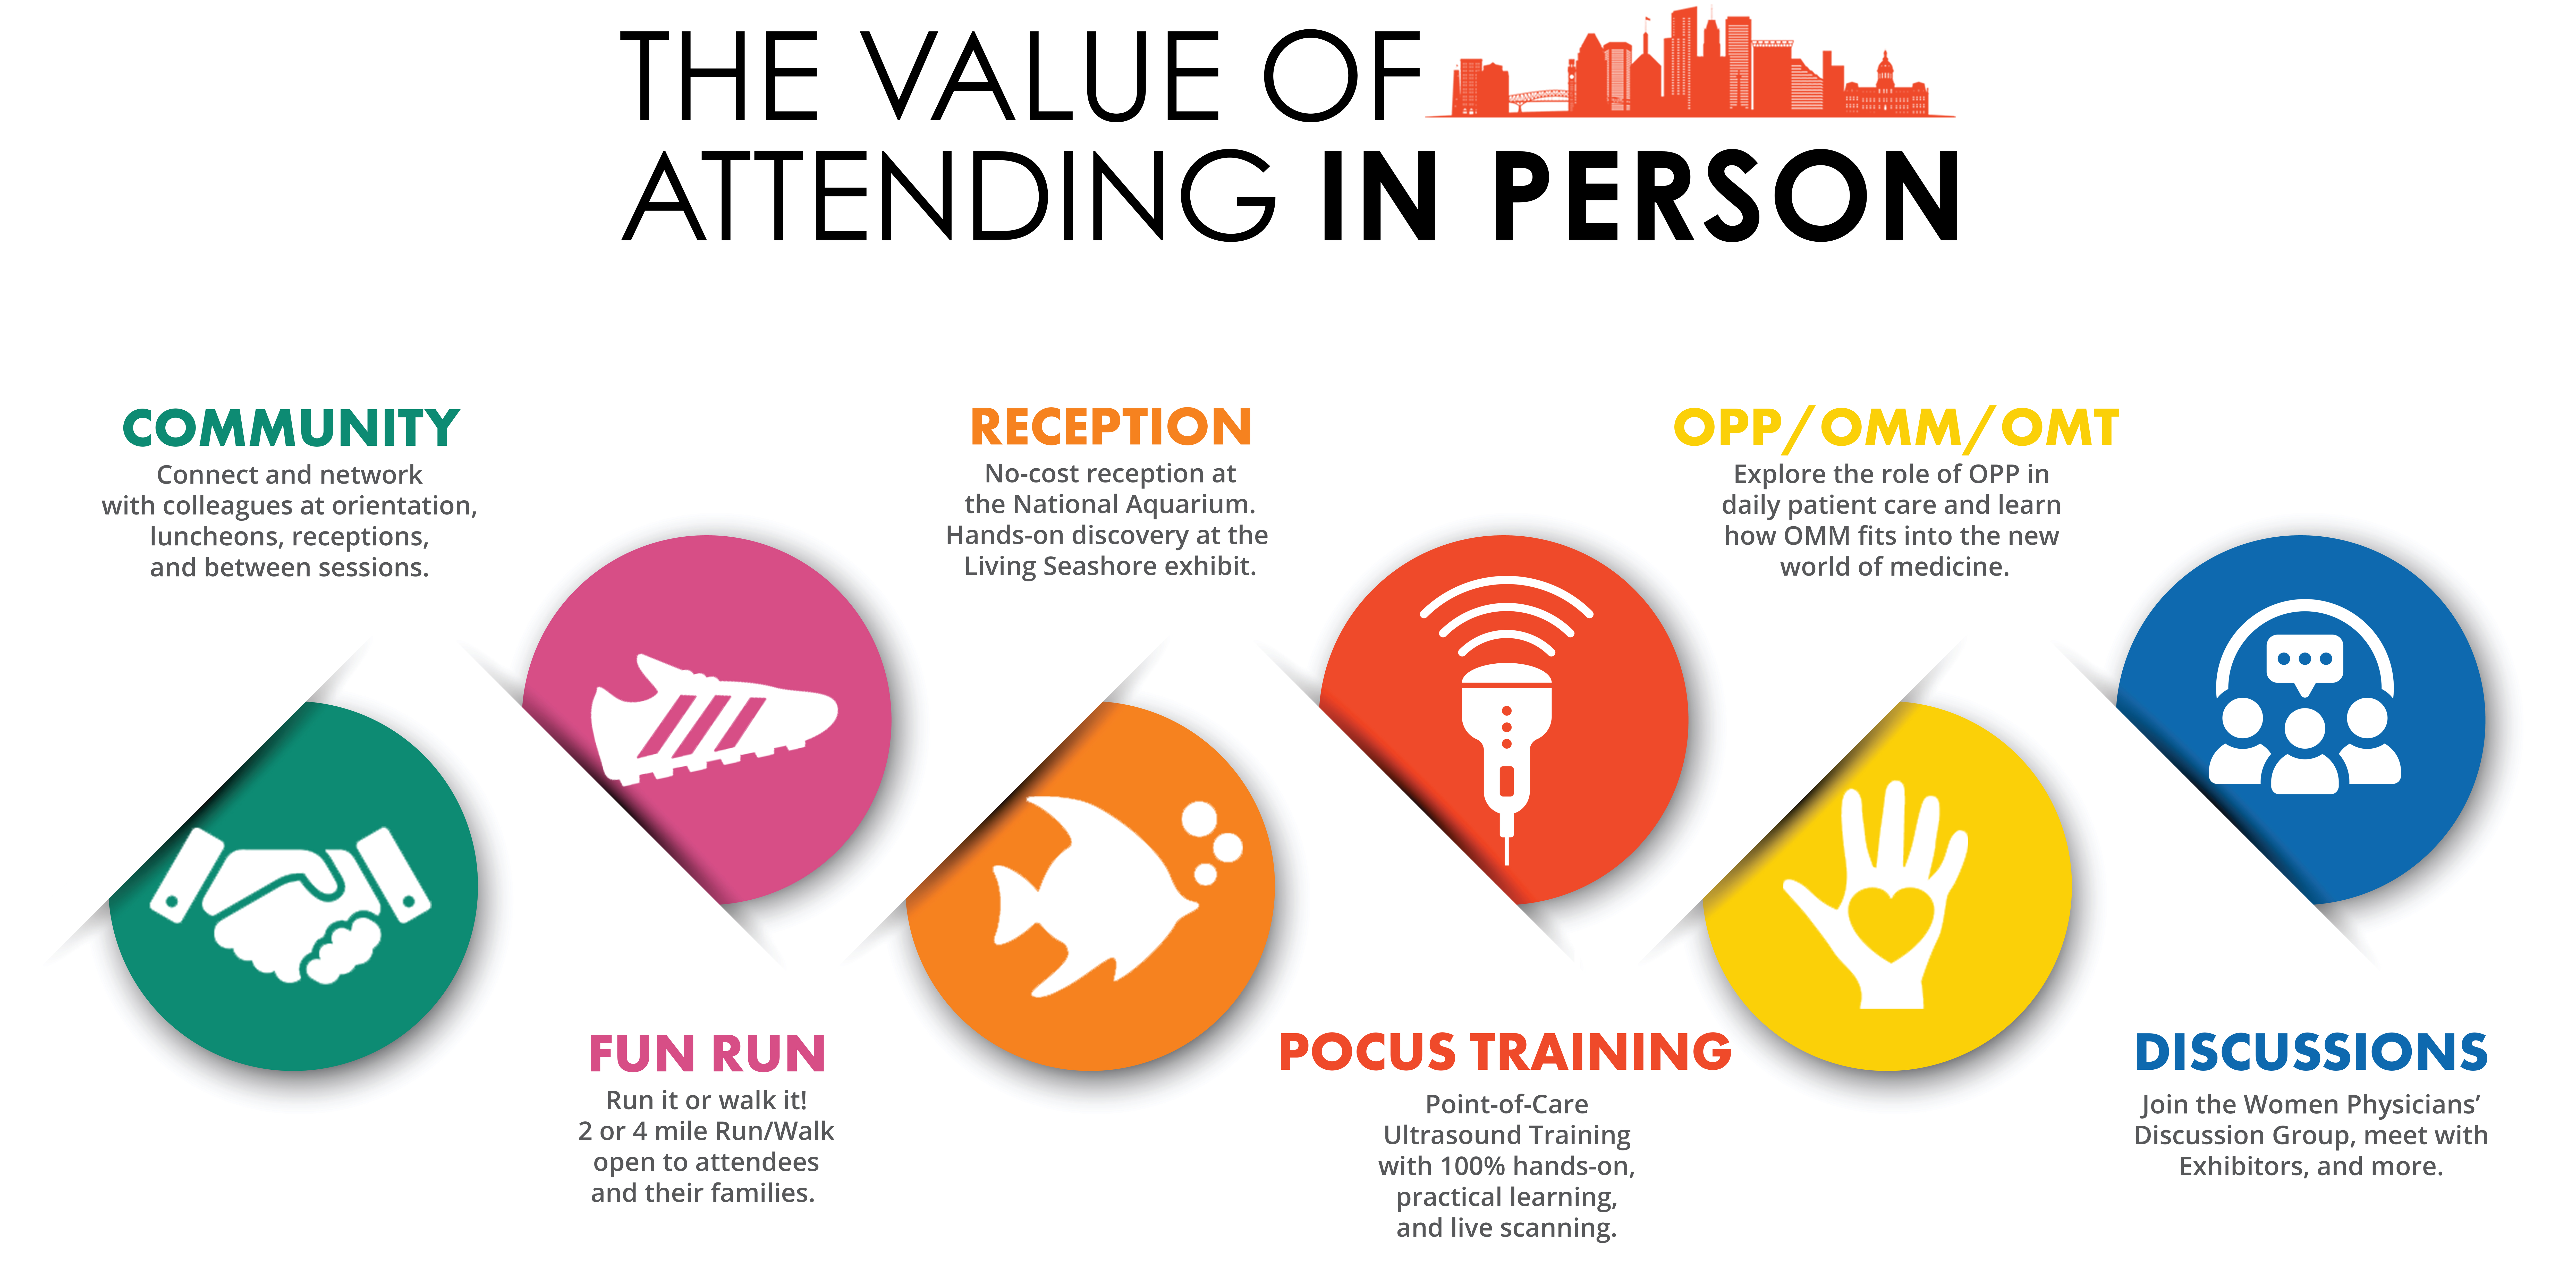 The Value of Attending in Person